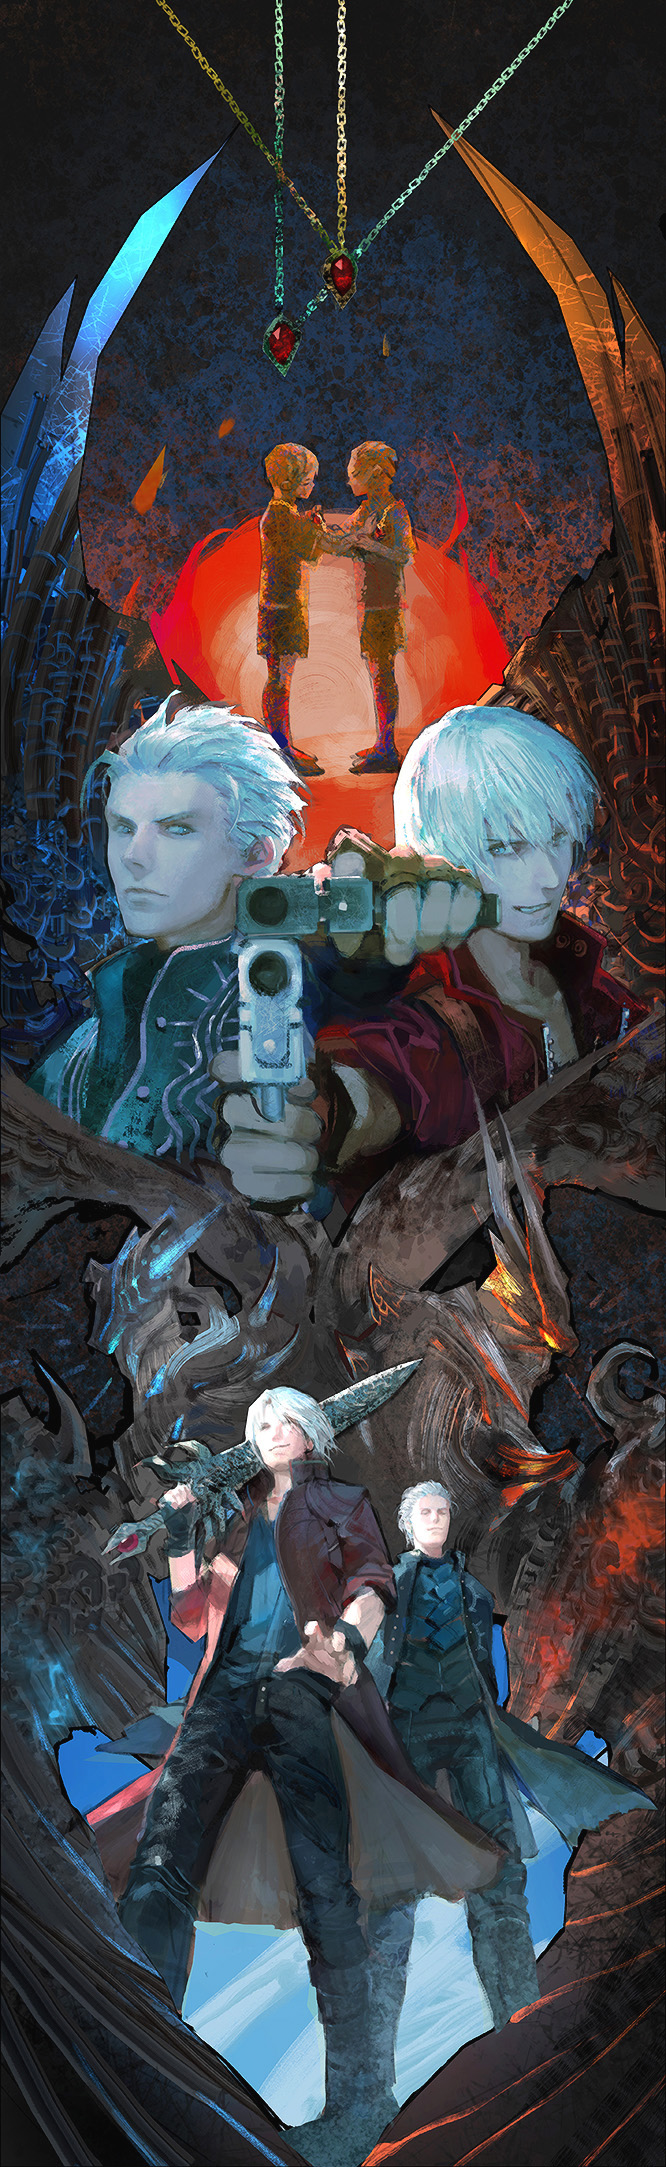 2boys age_progression aiming_at_viewer amulet brothers chains dante_(devil_may_cry) devil_may_cry devil_may_cry_3 devil_may_cry_5 devil_sword_dante devil_trigger ebony_&amp;_ivory gun hair_slicked_back handgun highres jacket jewelry long_image looking_at_viewer multiple_boys necklace over_shoulder red_jacket serious siblings silver_hair smile standing sword tin_nijigen vergil weapon weapon_over_shoulder